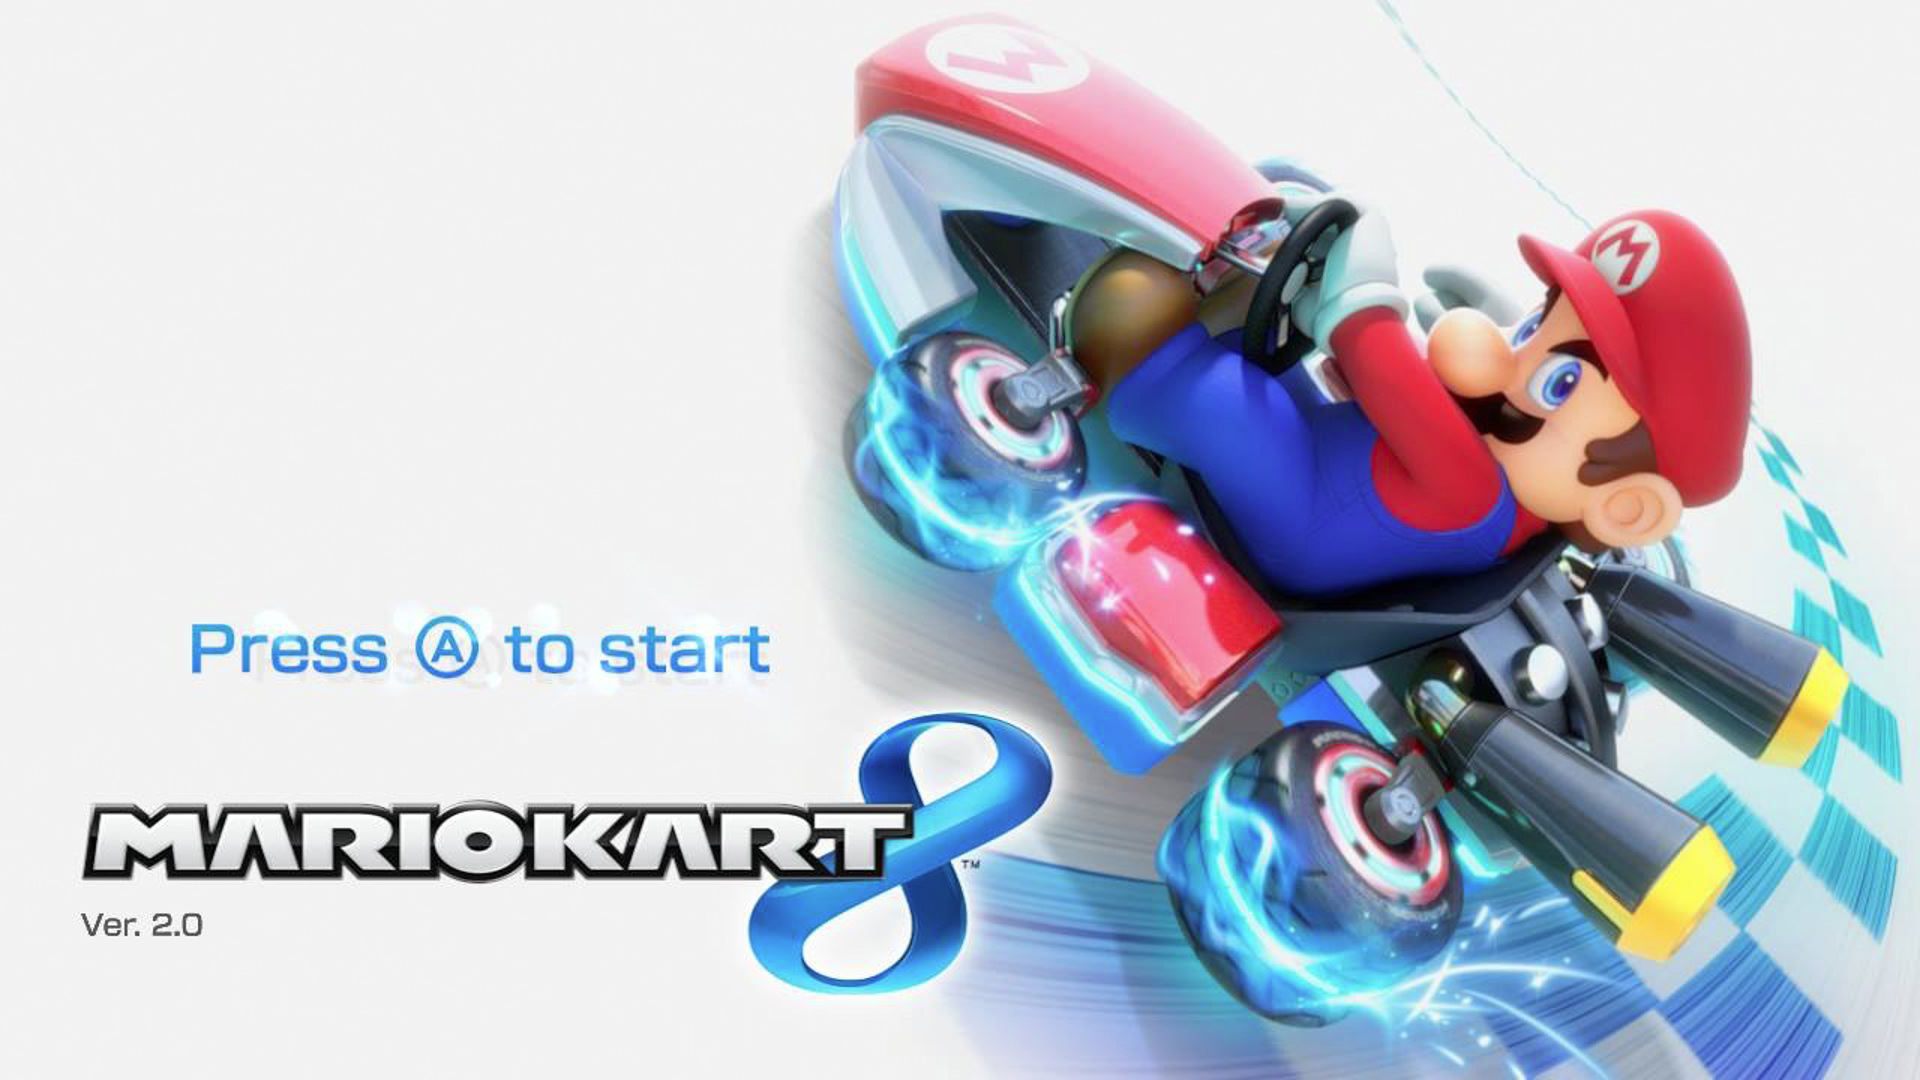 Mario Kart 8 was released earlier this year, making its triumphant entrance on the Nintendo Wii U in shiny high definition running at a buttery-smooth 60 frames per second. The original Super Mario Kart was released 22 years ago on the SNES. Put another way, it’s older than Miley Cyrus. Chances are, you've had at least a casual interest, if not a months-long obsession which tanked your grades and had you saying things like, 